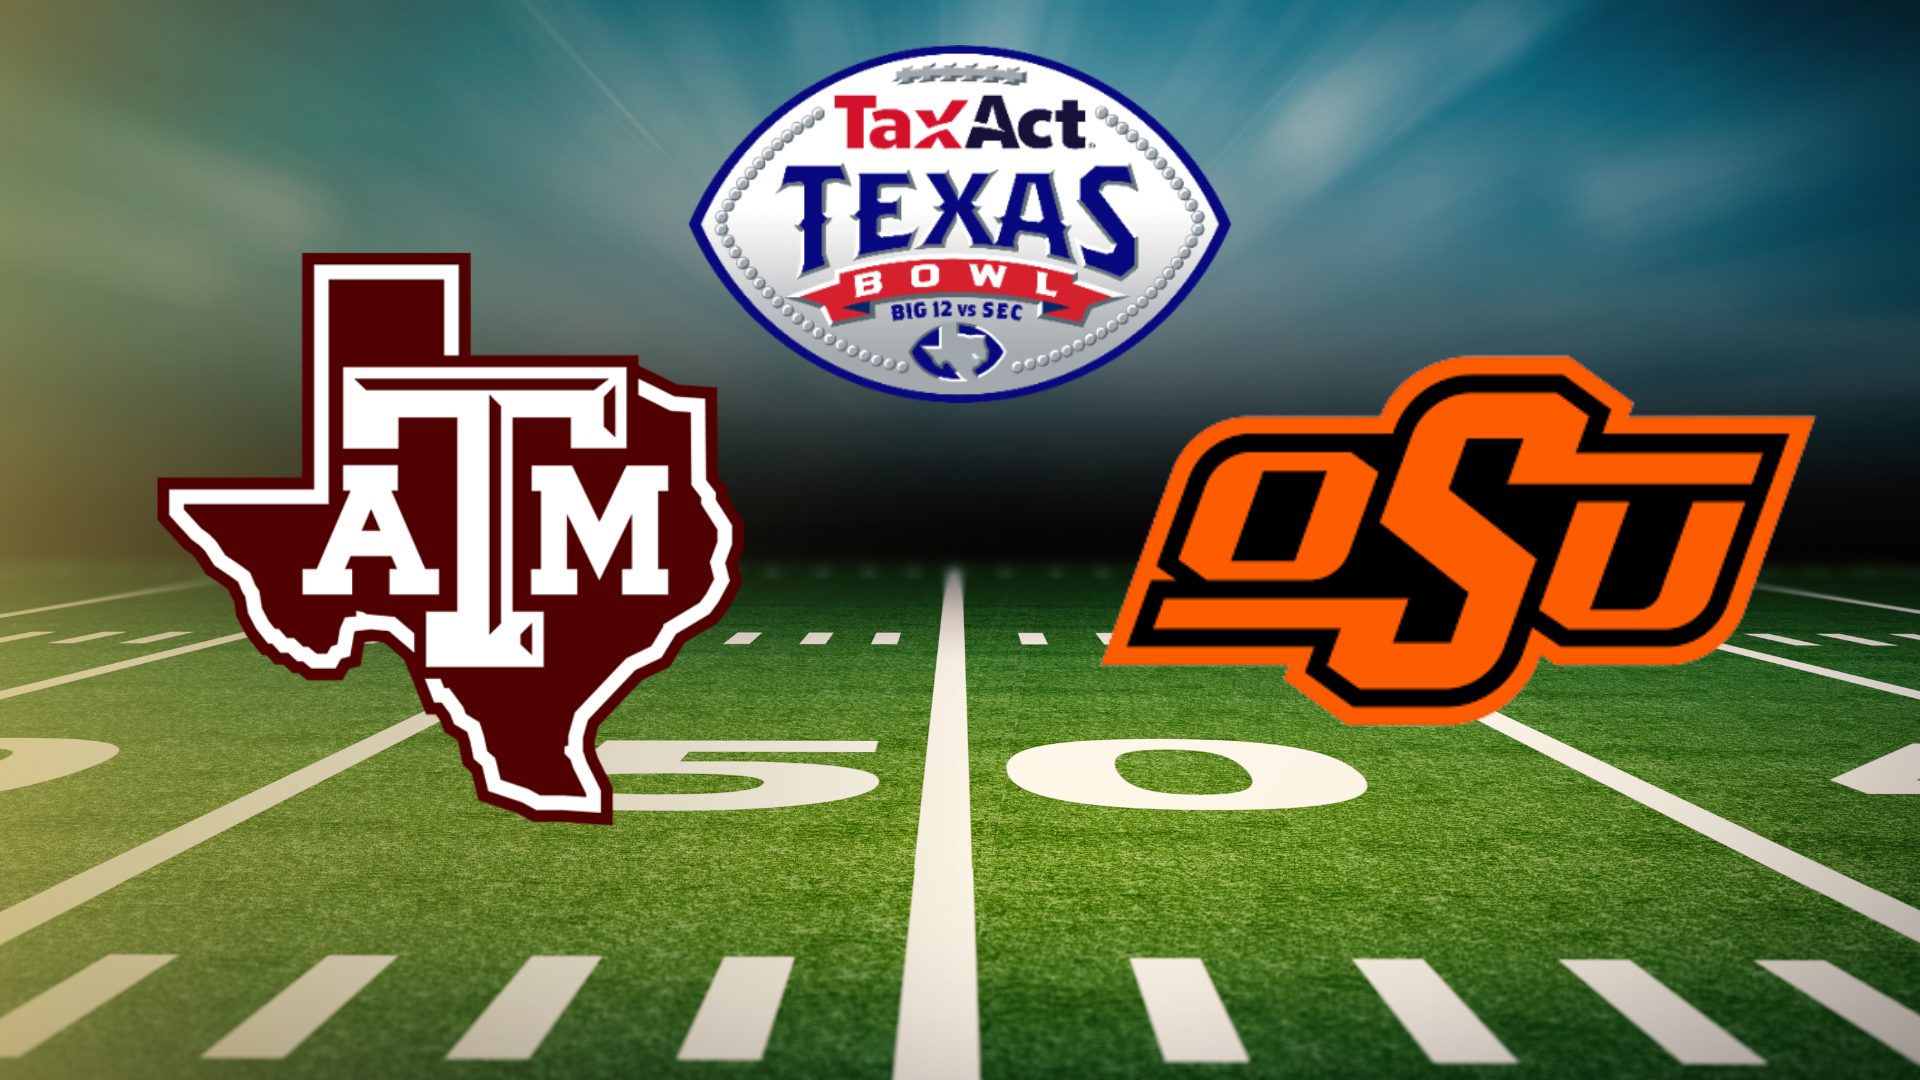 Partnerships and Charitable Activities Associated with the Texas Bowl